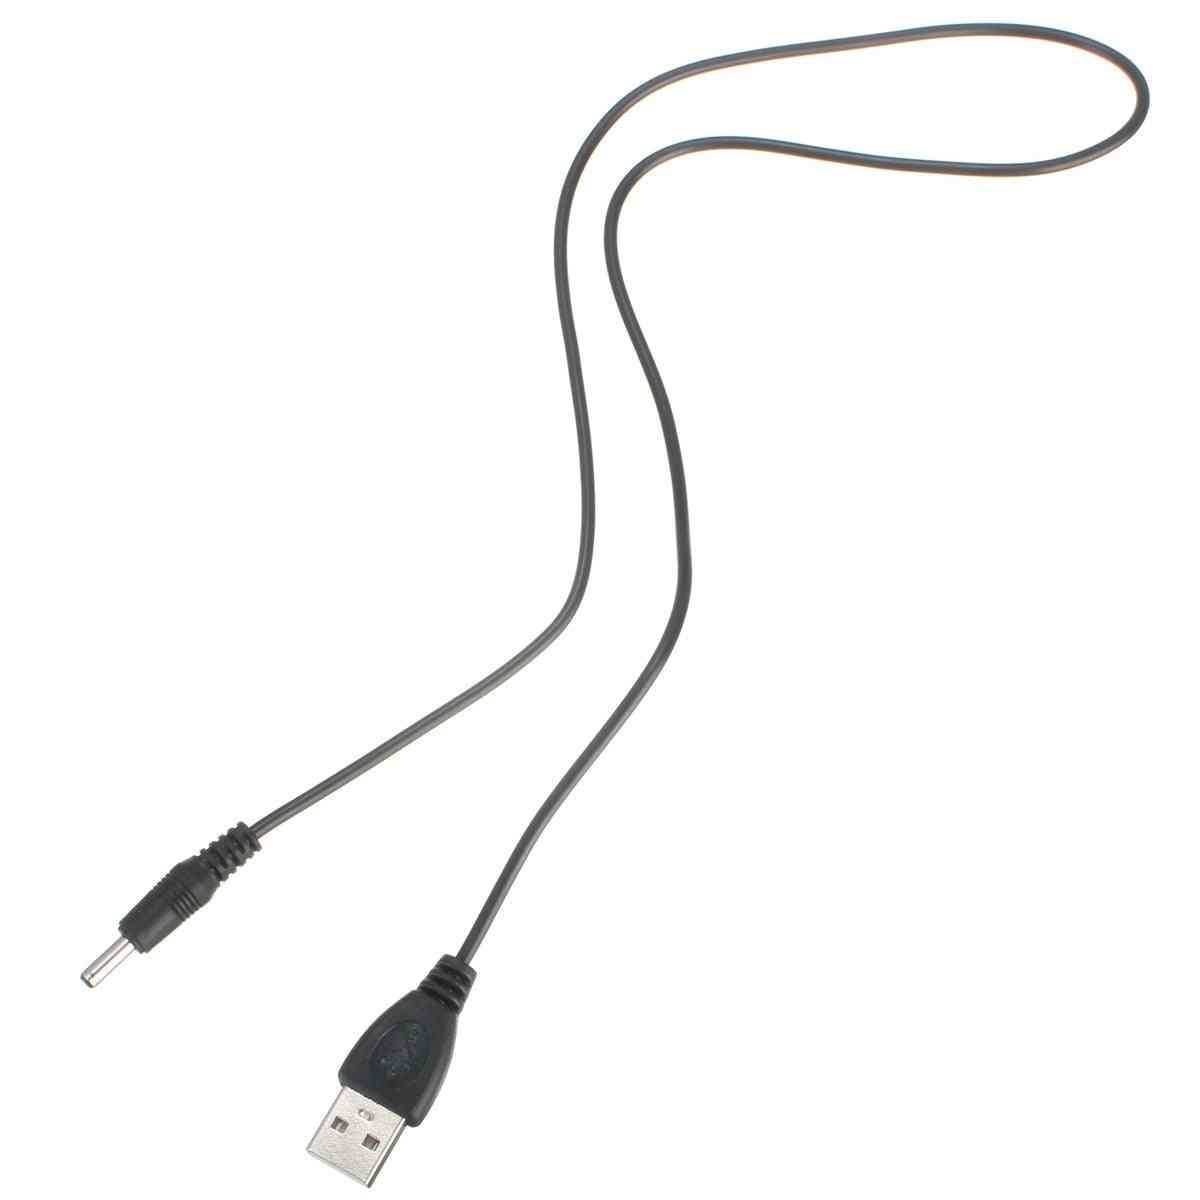 Universal Usb Charger Charging Cable